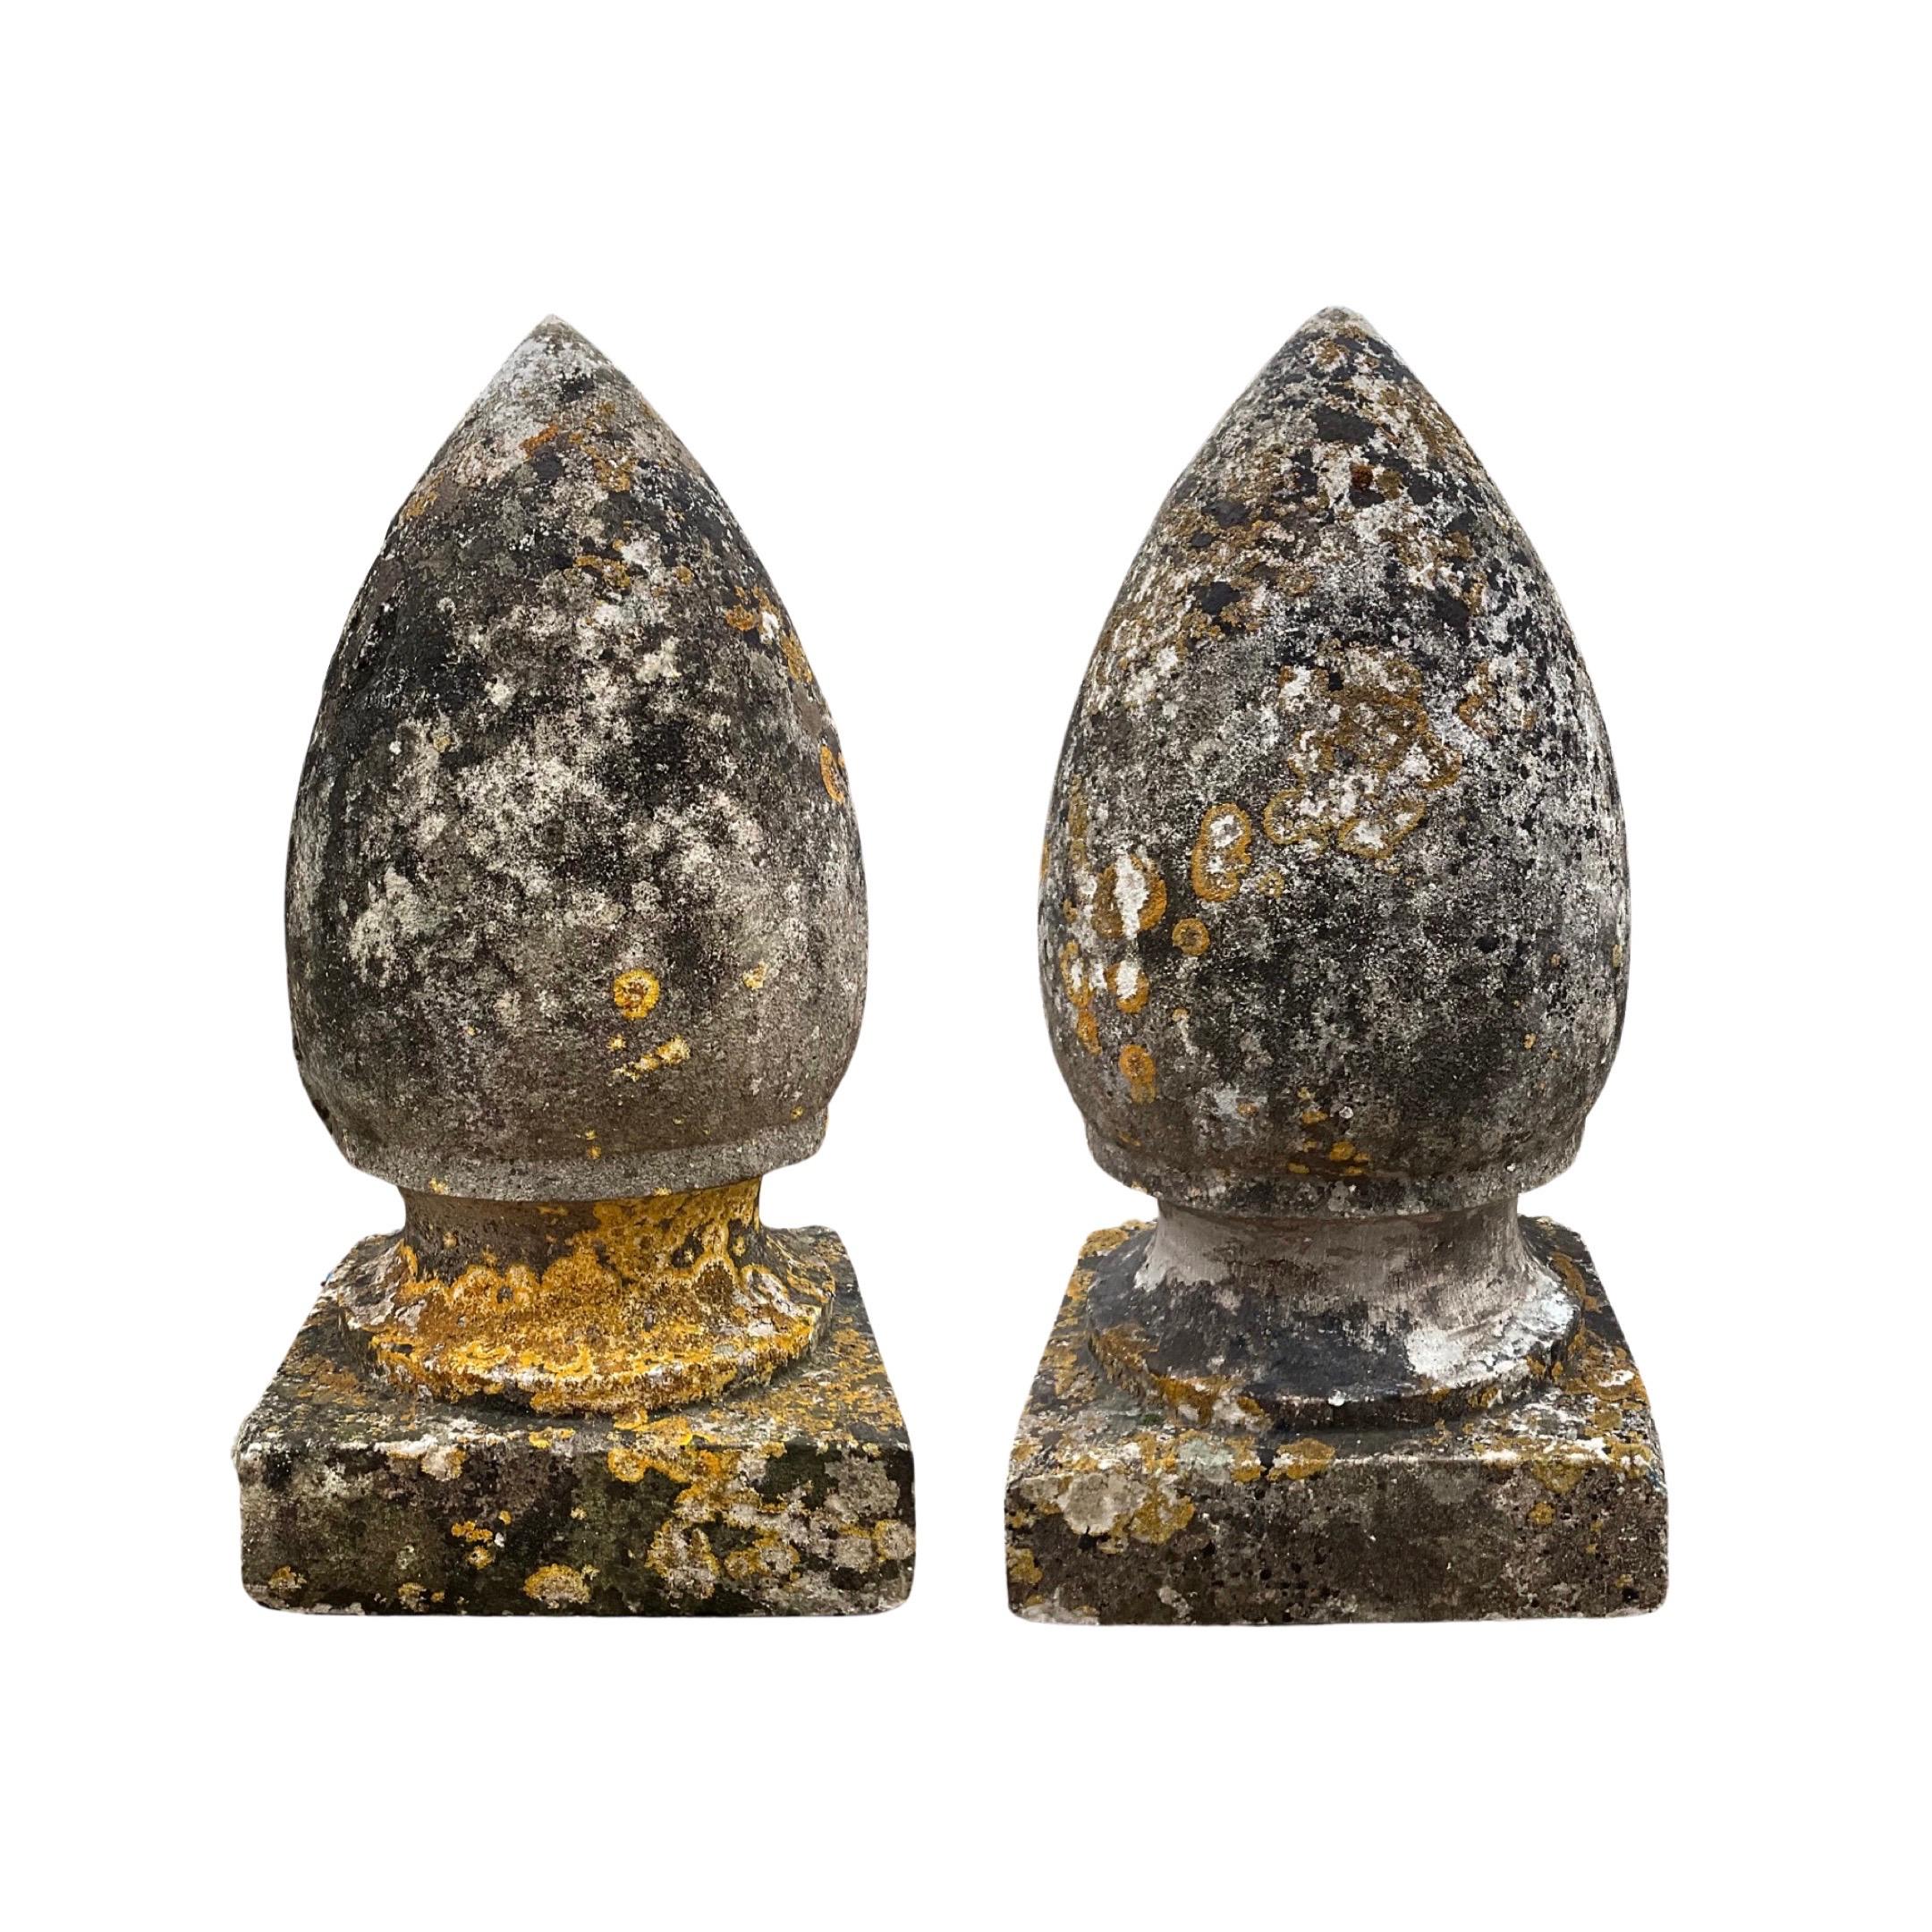 This pair of antique French limestone finials dates back to the 17th century and features a natural patina throughout. Made in France, these finials add a touch of history and elegance to any space they adorn. Enhance your decor with these expertly